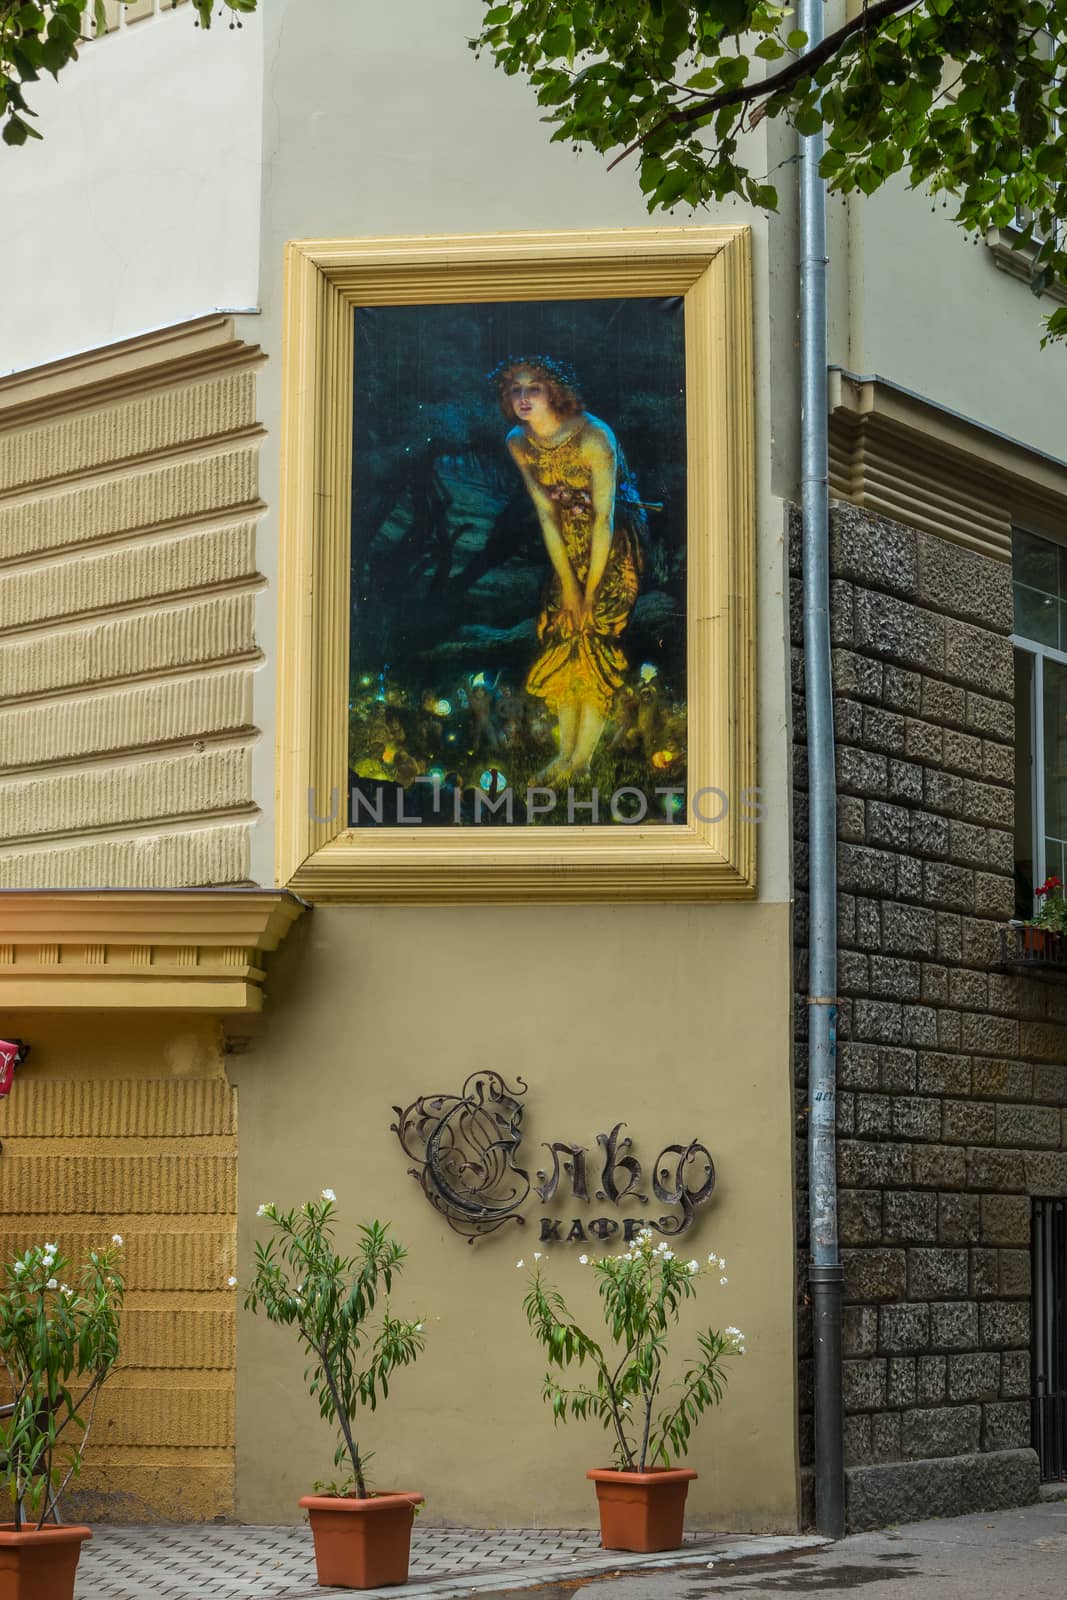 A large picture in the frame with a painted girl on the wall of the house with an inscription cafe under it. And standing flowers in pots on the sidewalk near the house. by Adamchuk